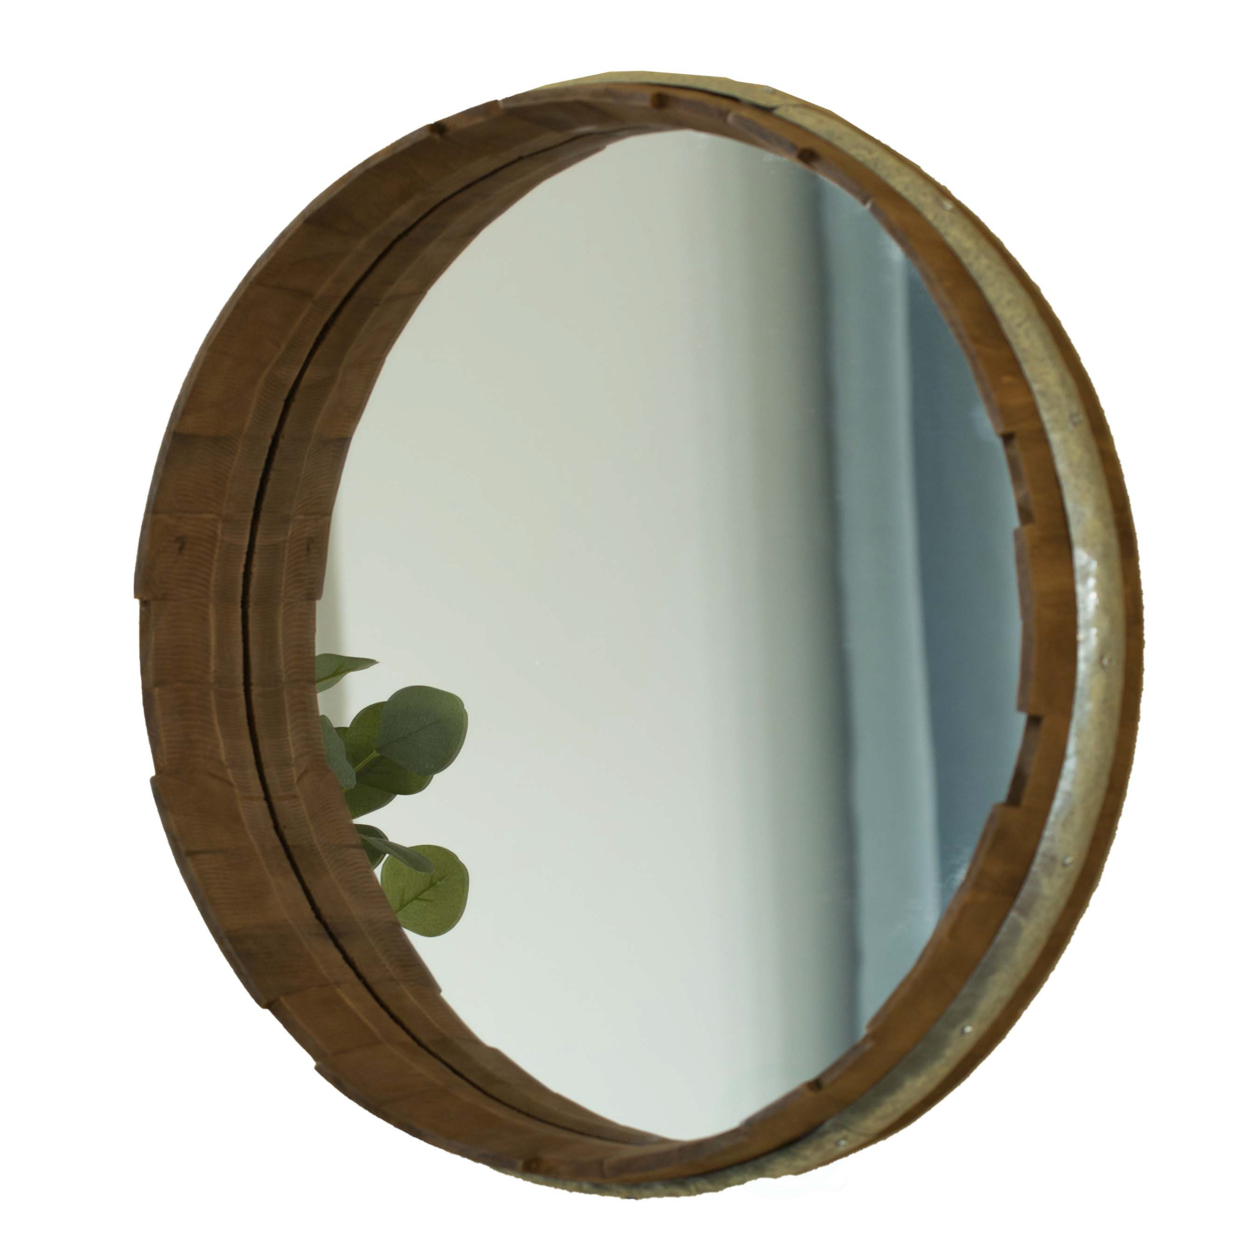 Round Rustic Wood And Galvanized Metal Framed Wine Barrel Shaped Wall Mirror